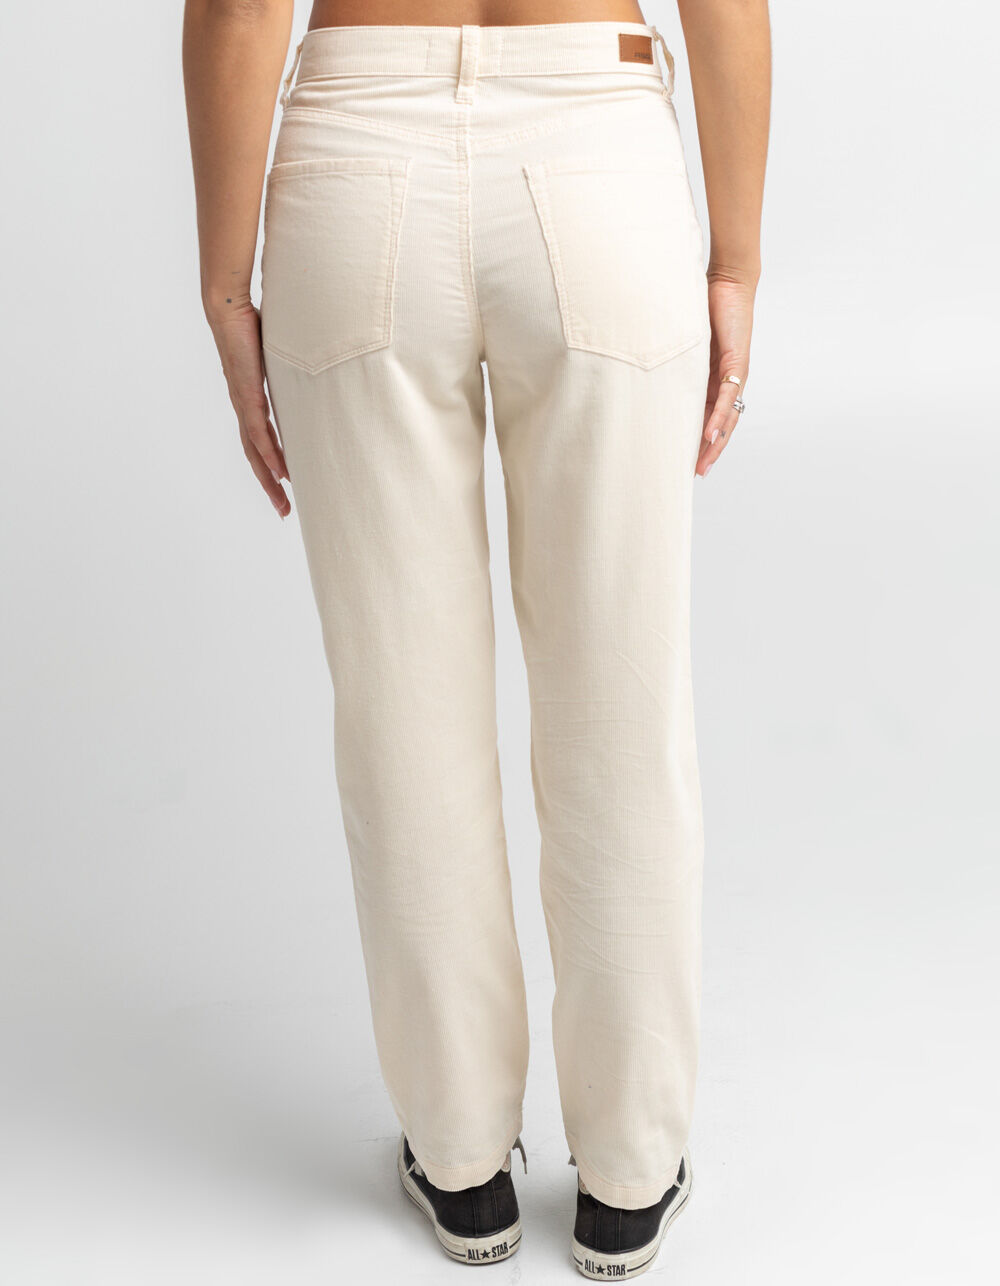 Women's Corduroy Pants: 100+ Items up to −90%